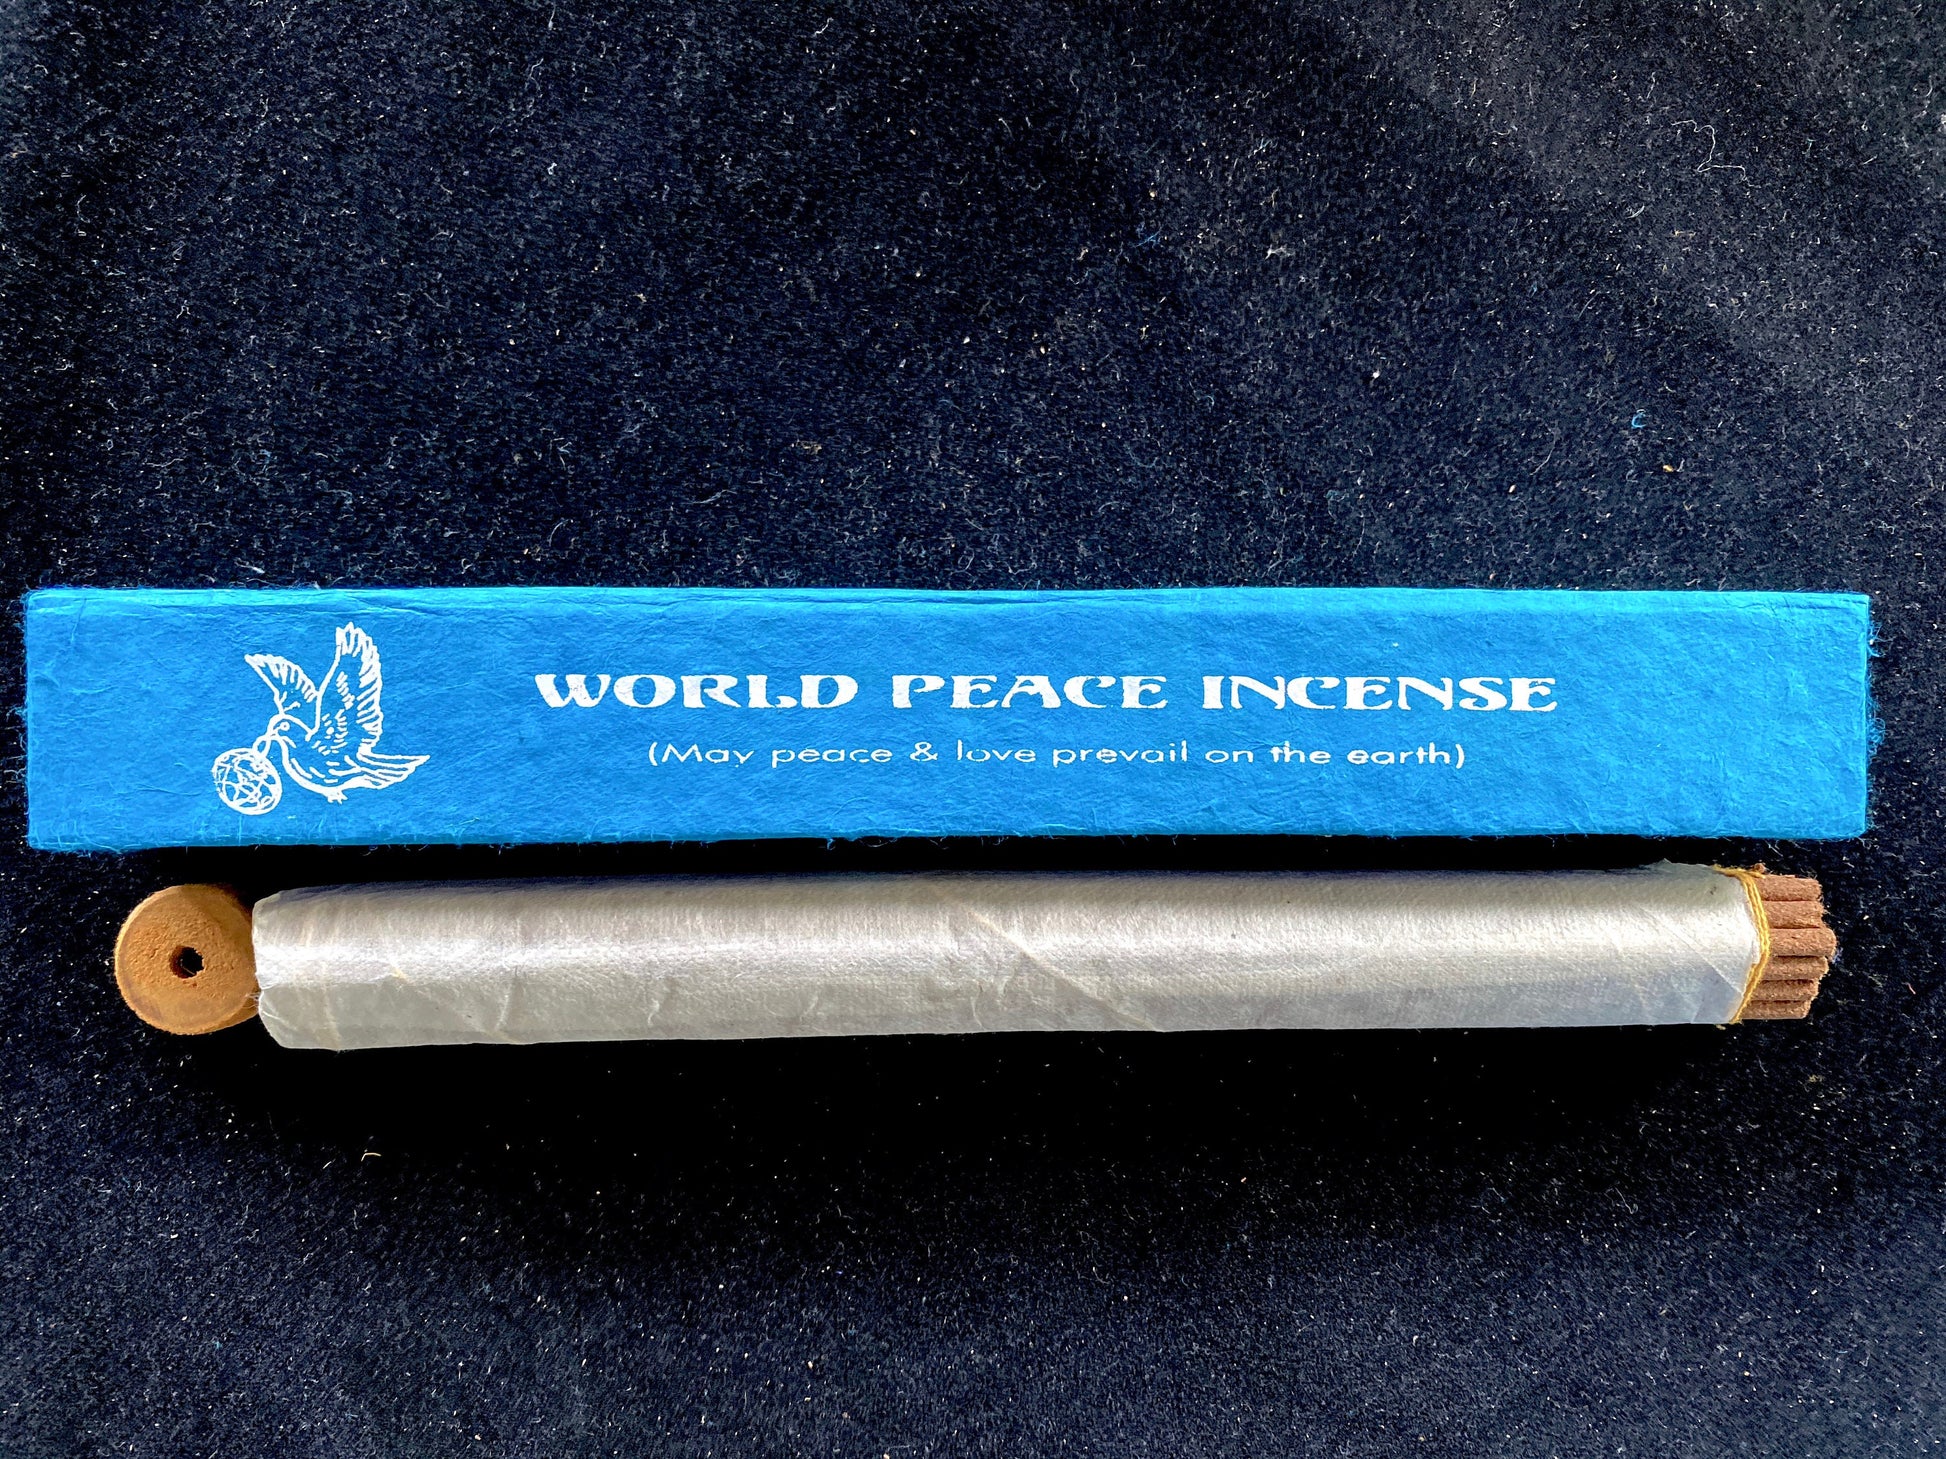 World Peace Incense | Tibetan Incense | 19 sticks | 8.5 inch sticks | May peace & love prevail on the earth